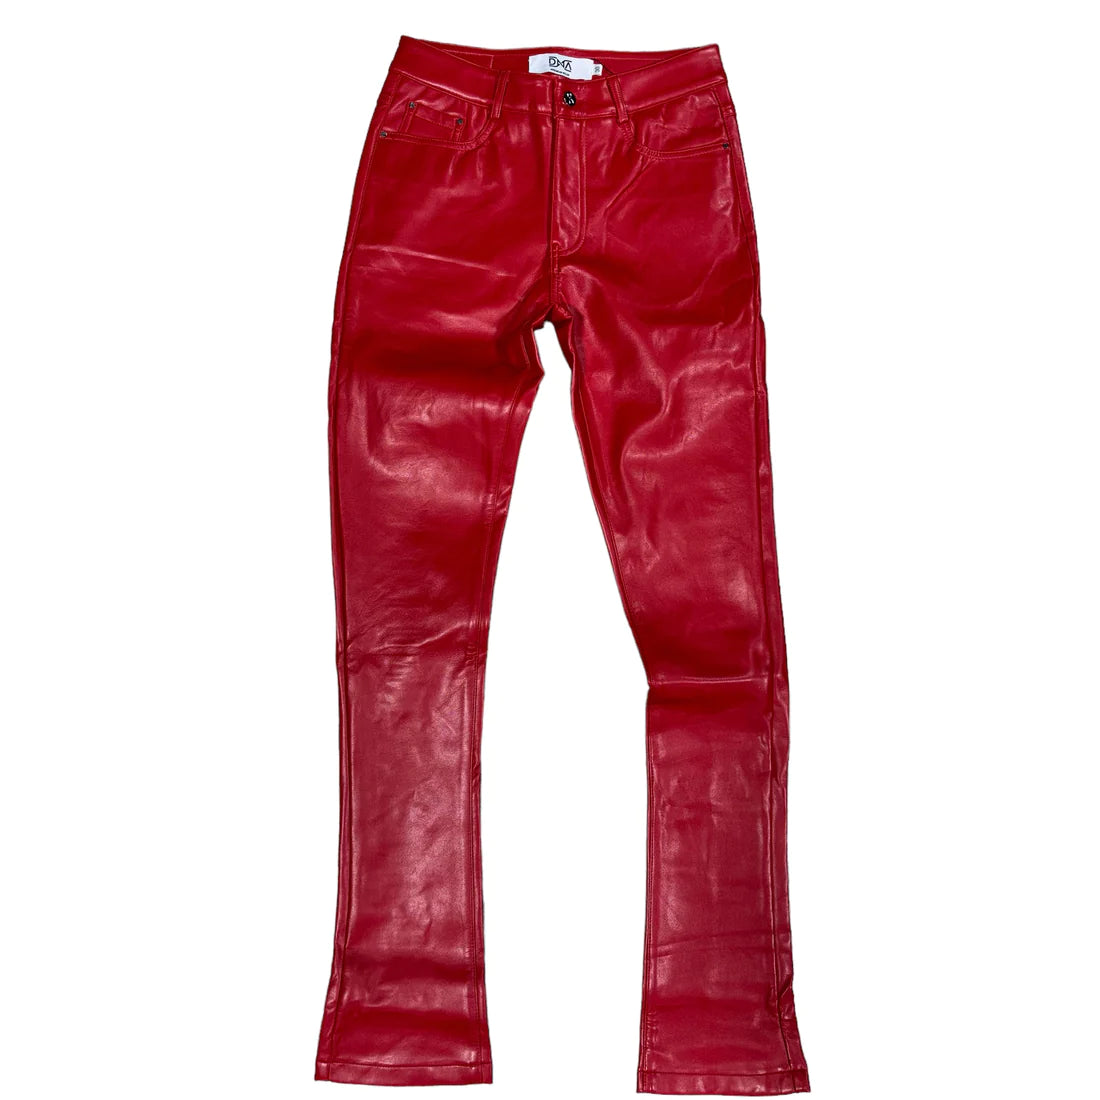 DNA Worldwide Jeans - Red/White